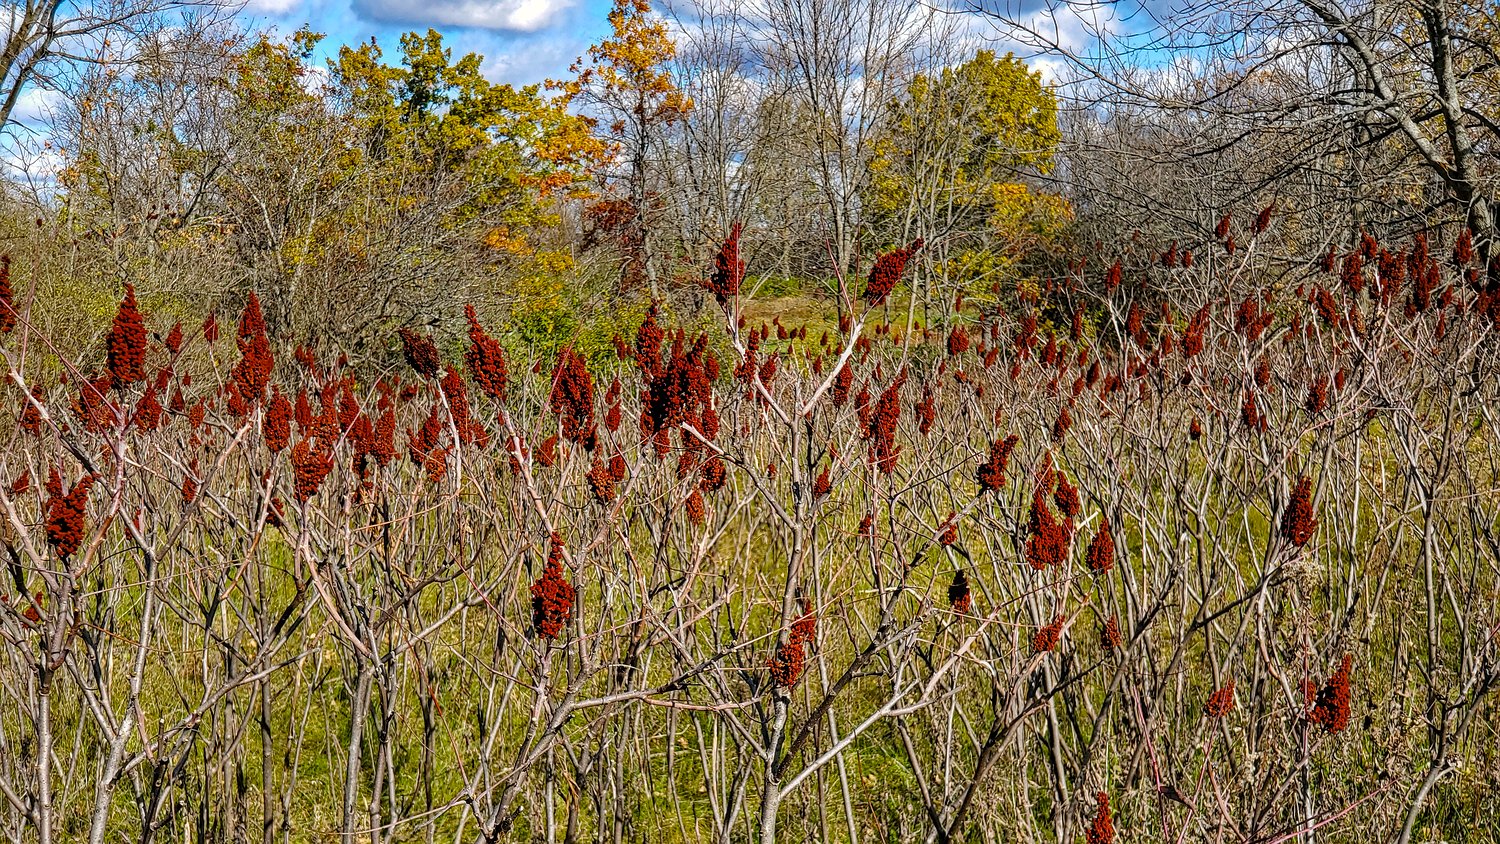 Deep, rich, late fall colors at Rush Creek Conservation Area.